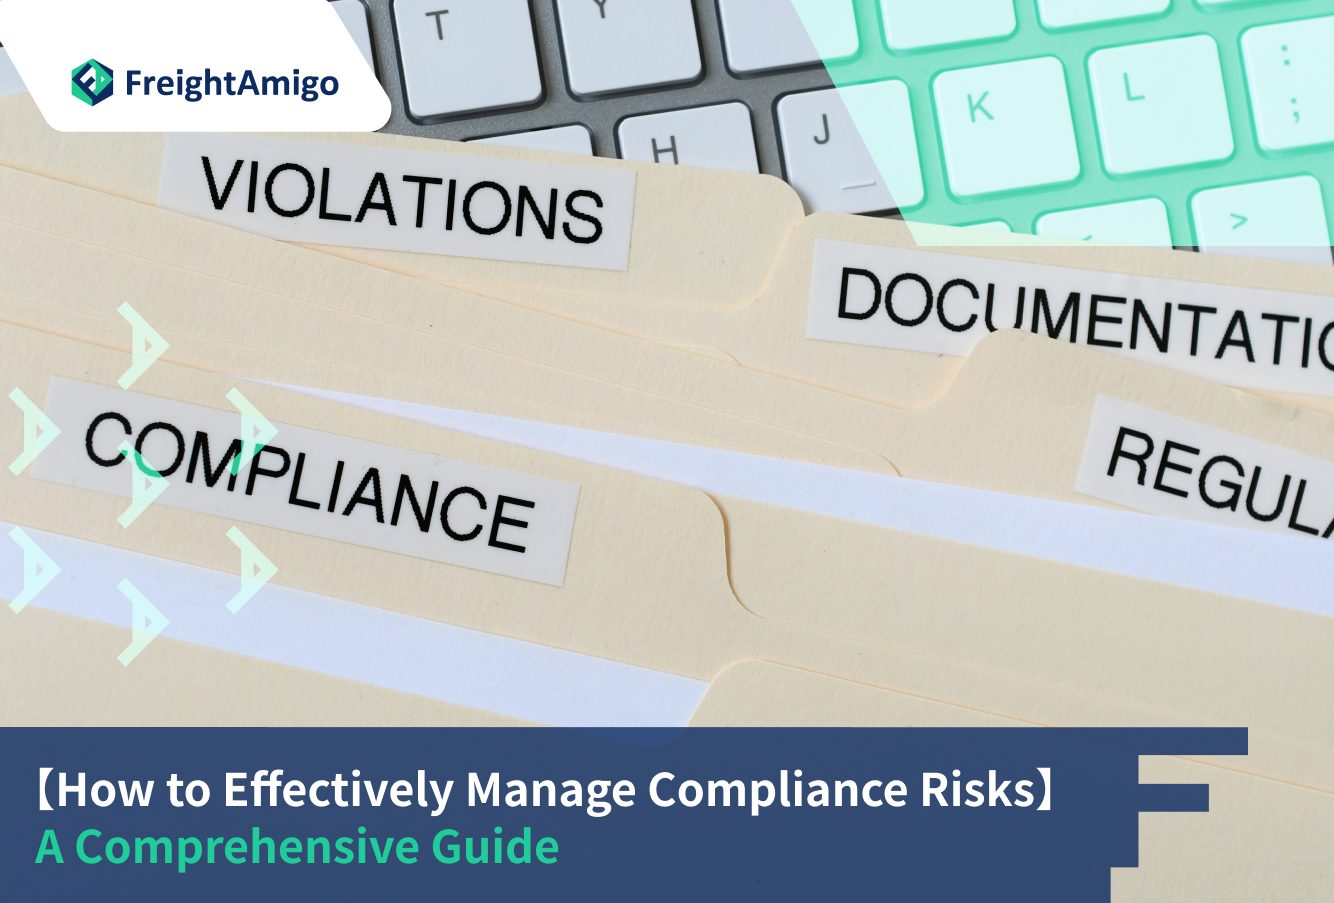 How to Effectively Manage Compliance Risks: A Comprehensive Guide